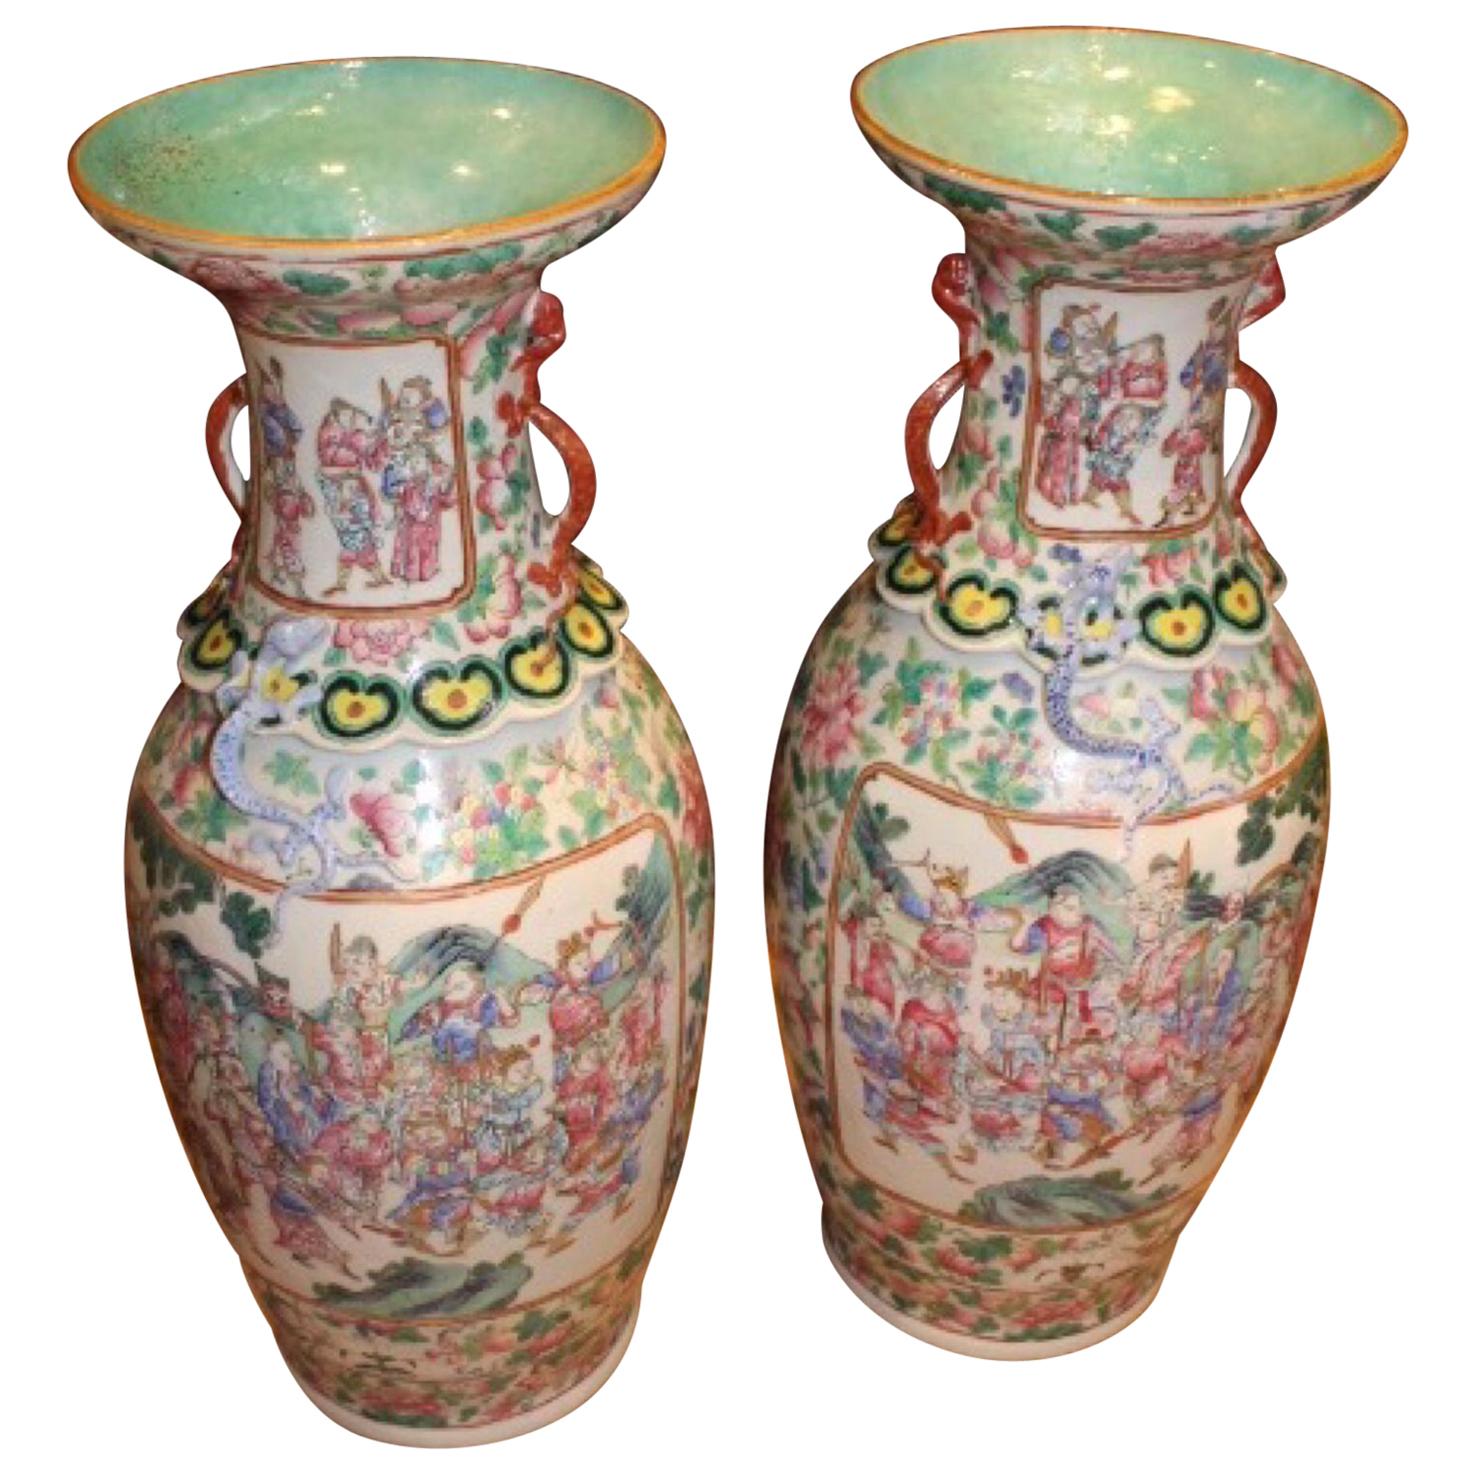 19th Century, Pair of Chinese Canton Famille Rose Baluster Vases, China